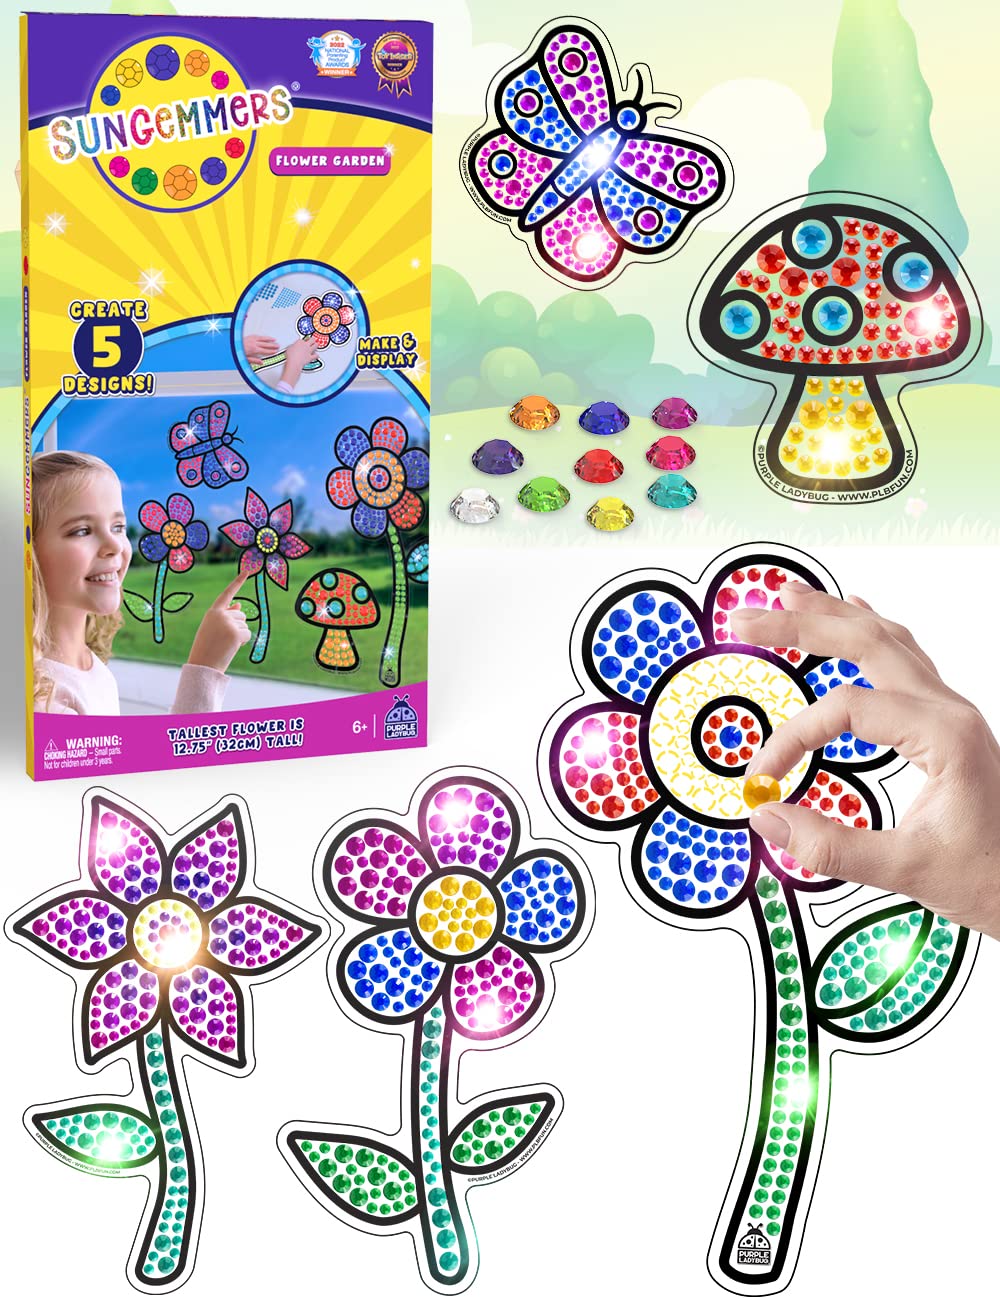 WEKEY Window Art Suncatcher Kits for Kids,Diamond Painting Kits for  Kids,Gem Art Crafts for Girls Ages 8-12, Birthday Kids Crafts Gifts for  Girls